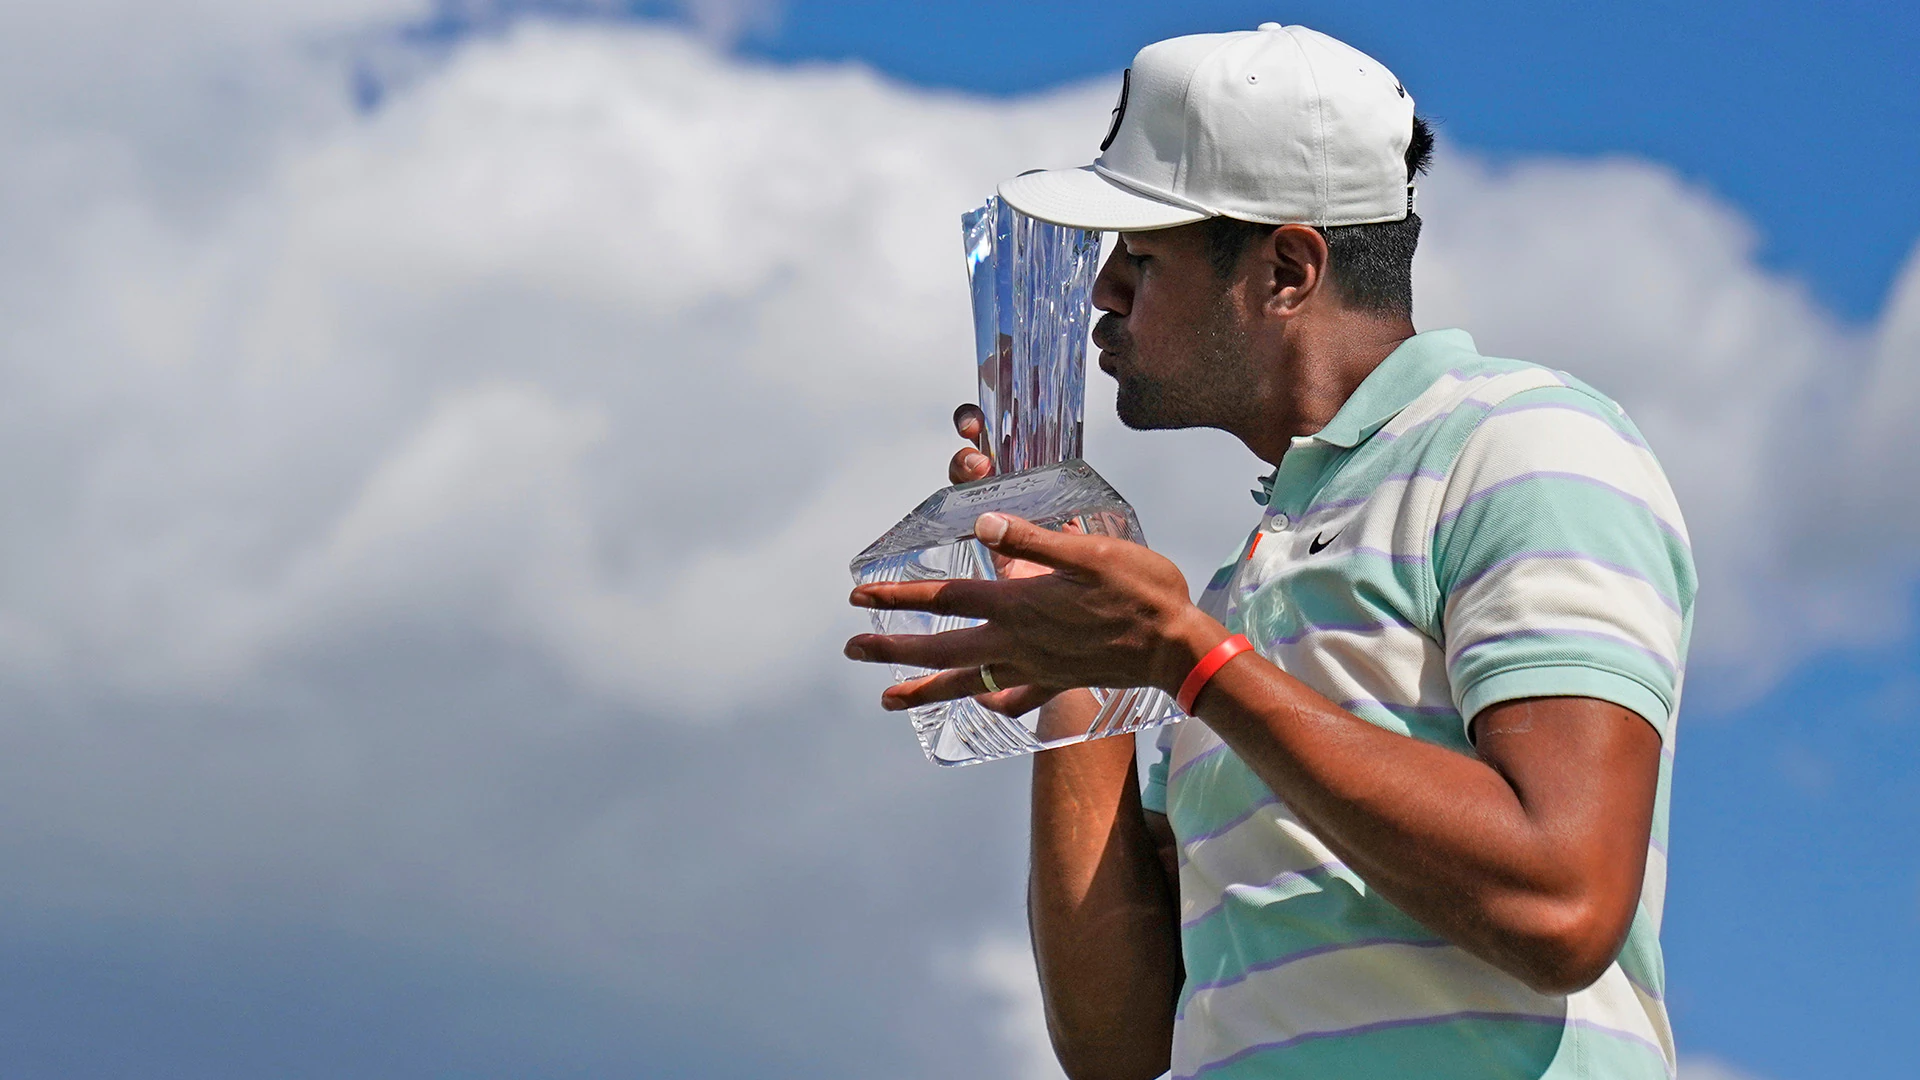 Tony Finau wins 3M Open by 3 with late surge, Piercy collapse